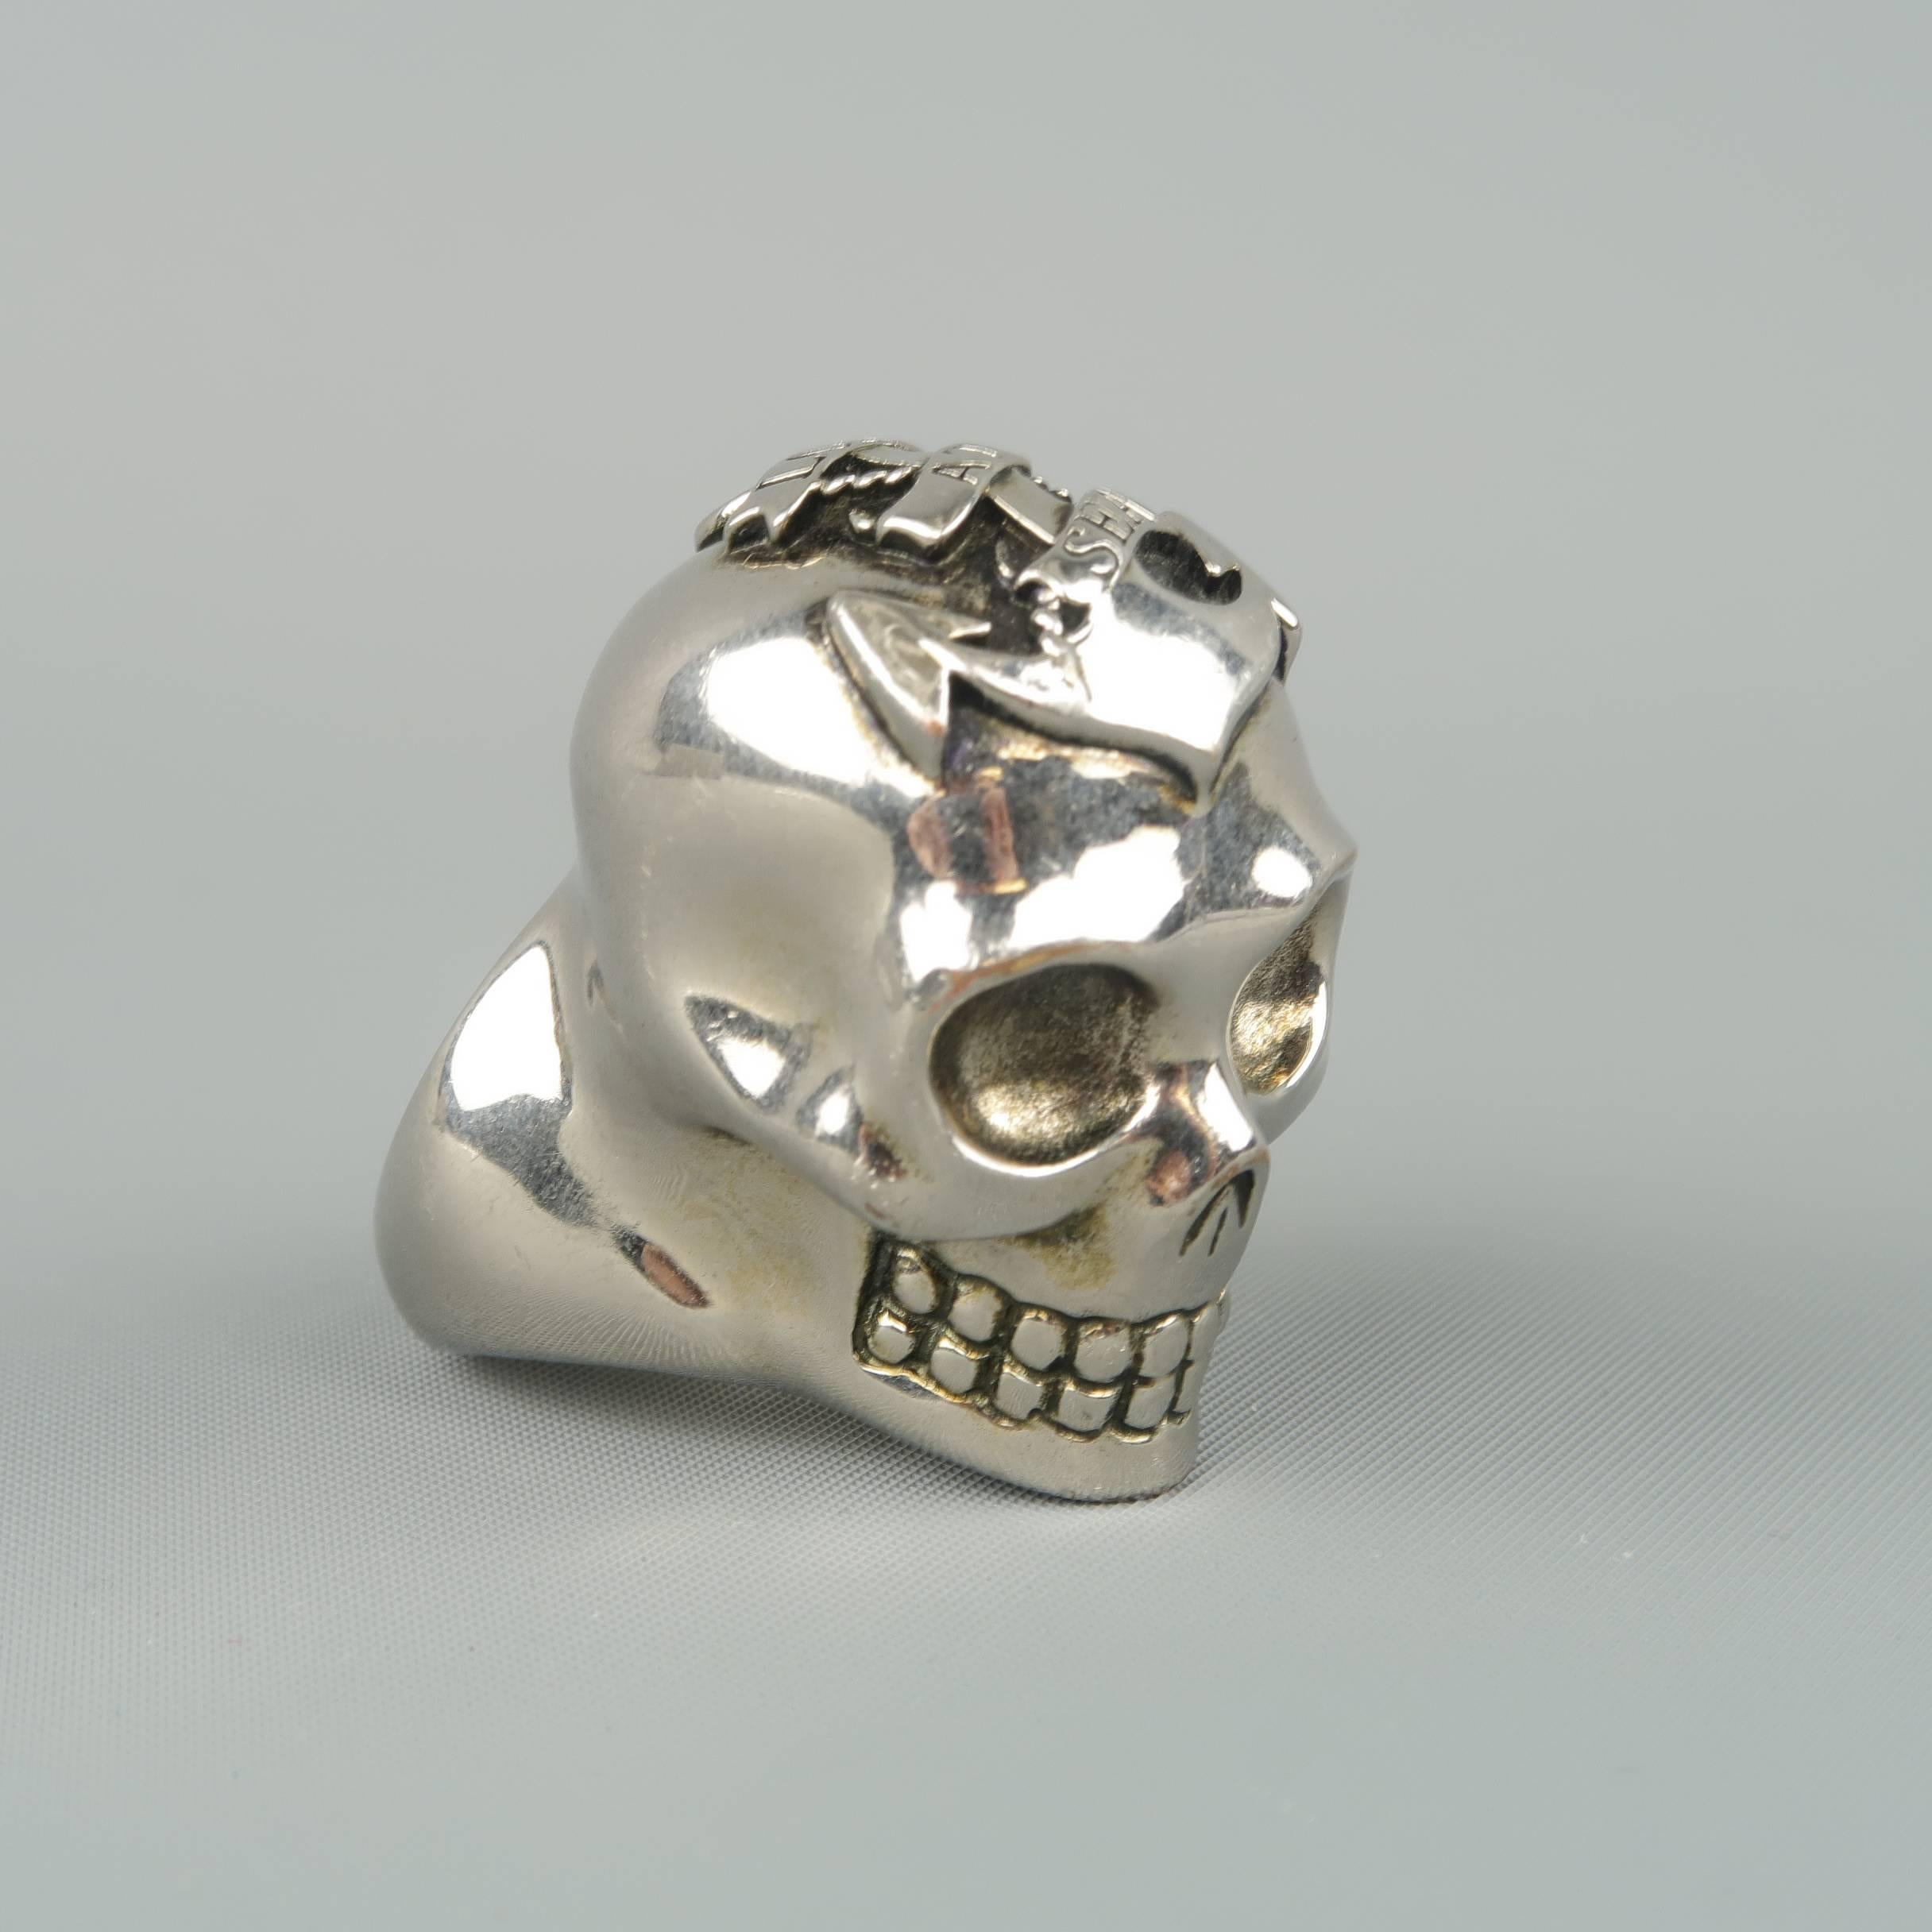 ALEXANDER MCQUEEN ring comes in polished silver tone metal and features an oversized engraved skull with 